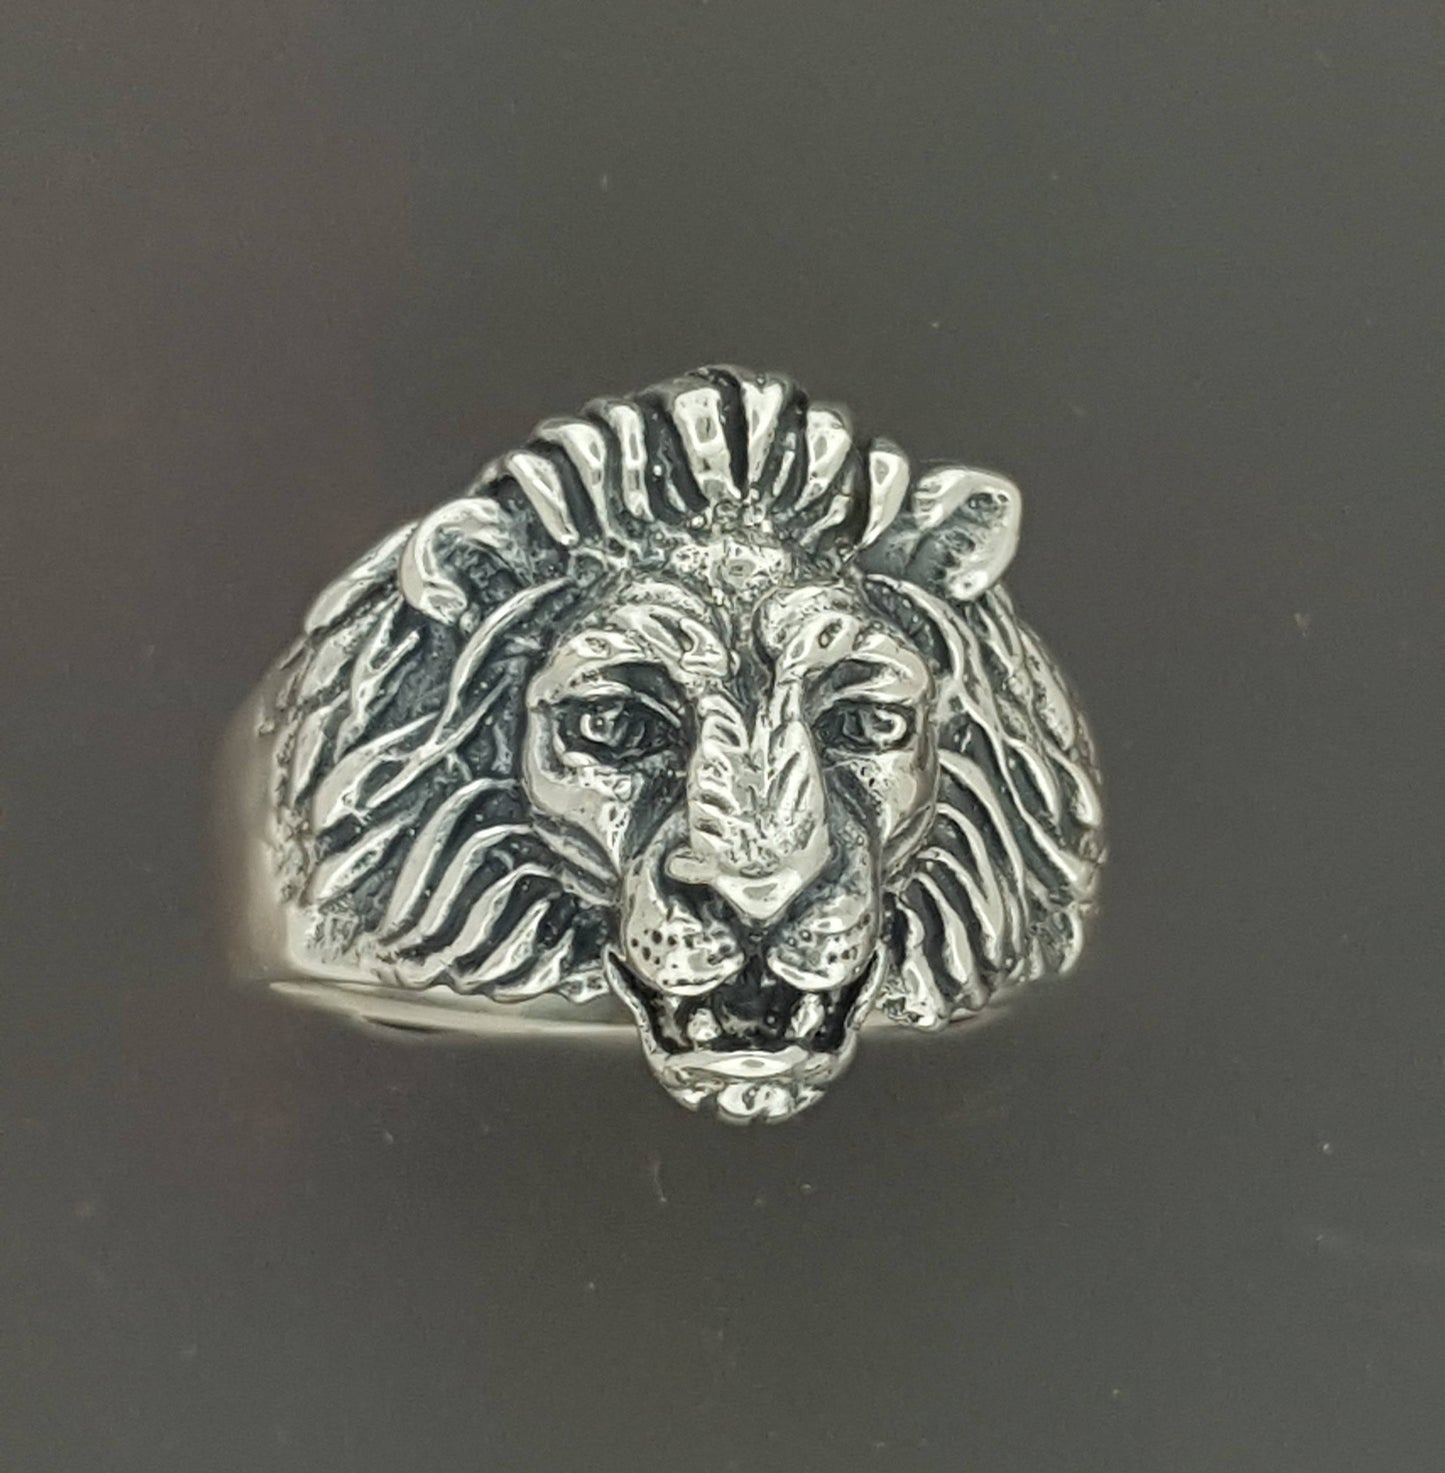 1950s Vintage Style Classic Lion Ring in Sterling Silver or Antique Bronze